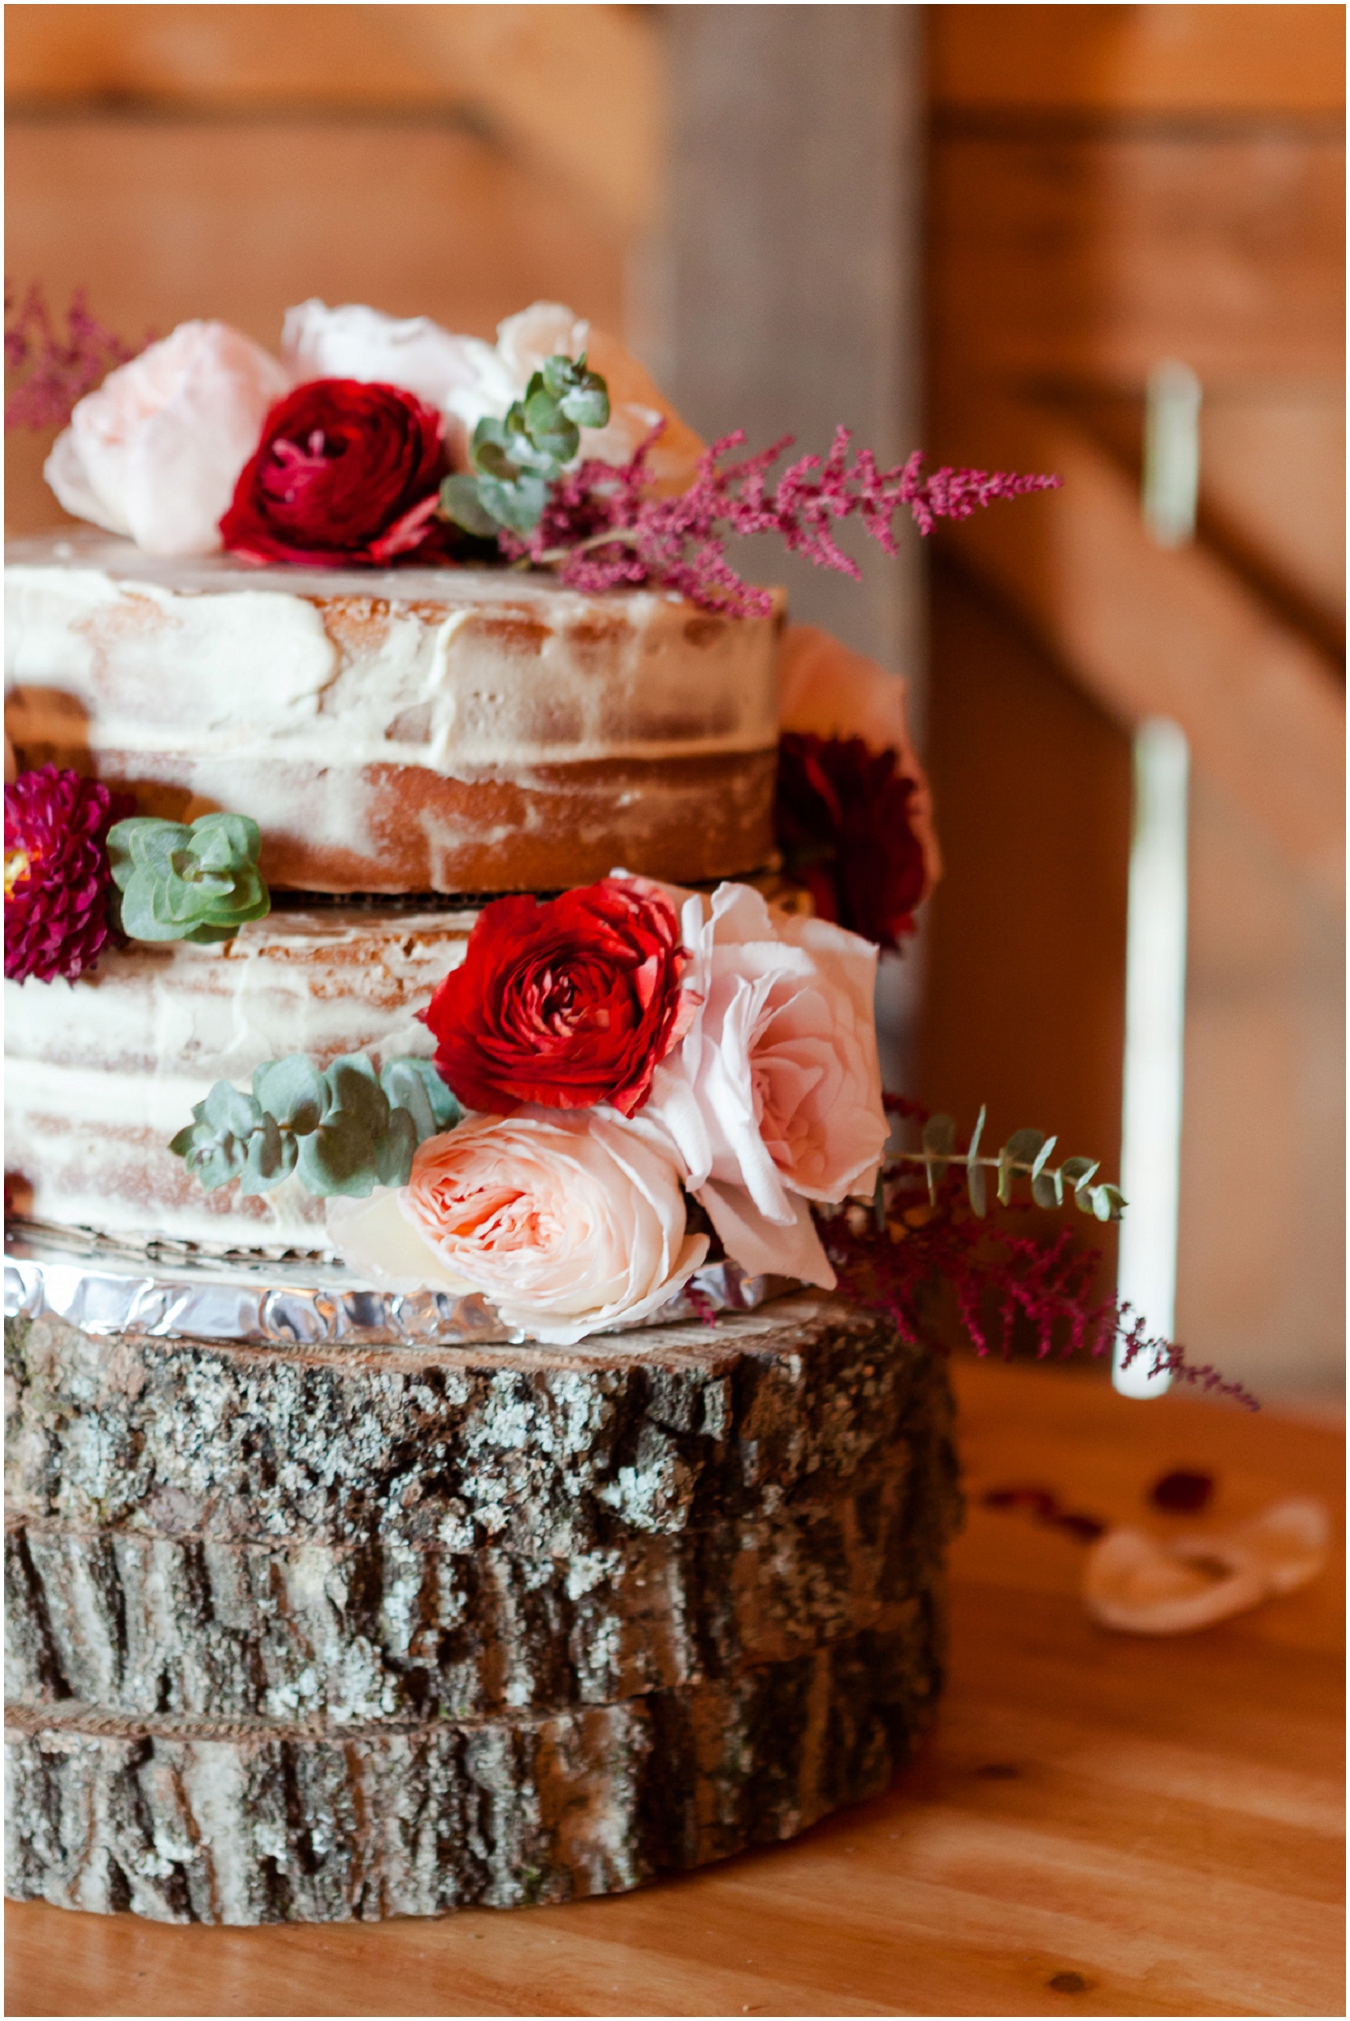 Chaumette Vineyards and Winery Wedding Ste. Genevieve Photographer Aleen and Rich wedding cake photo